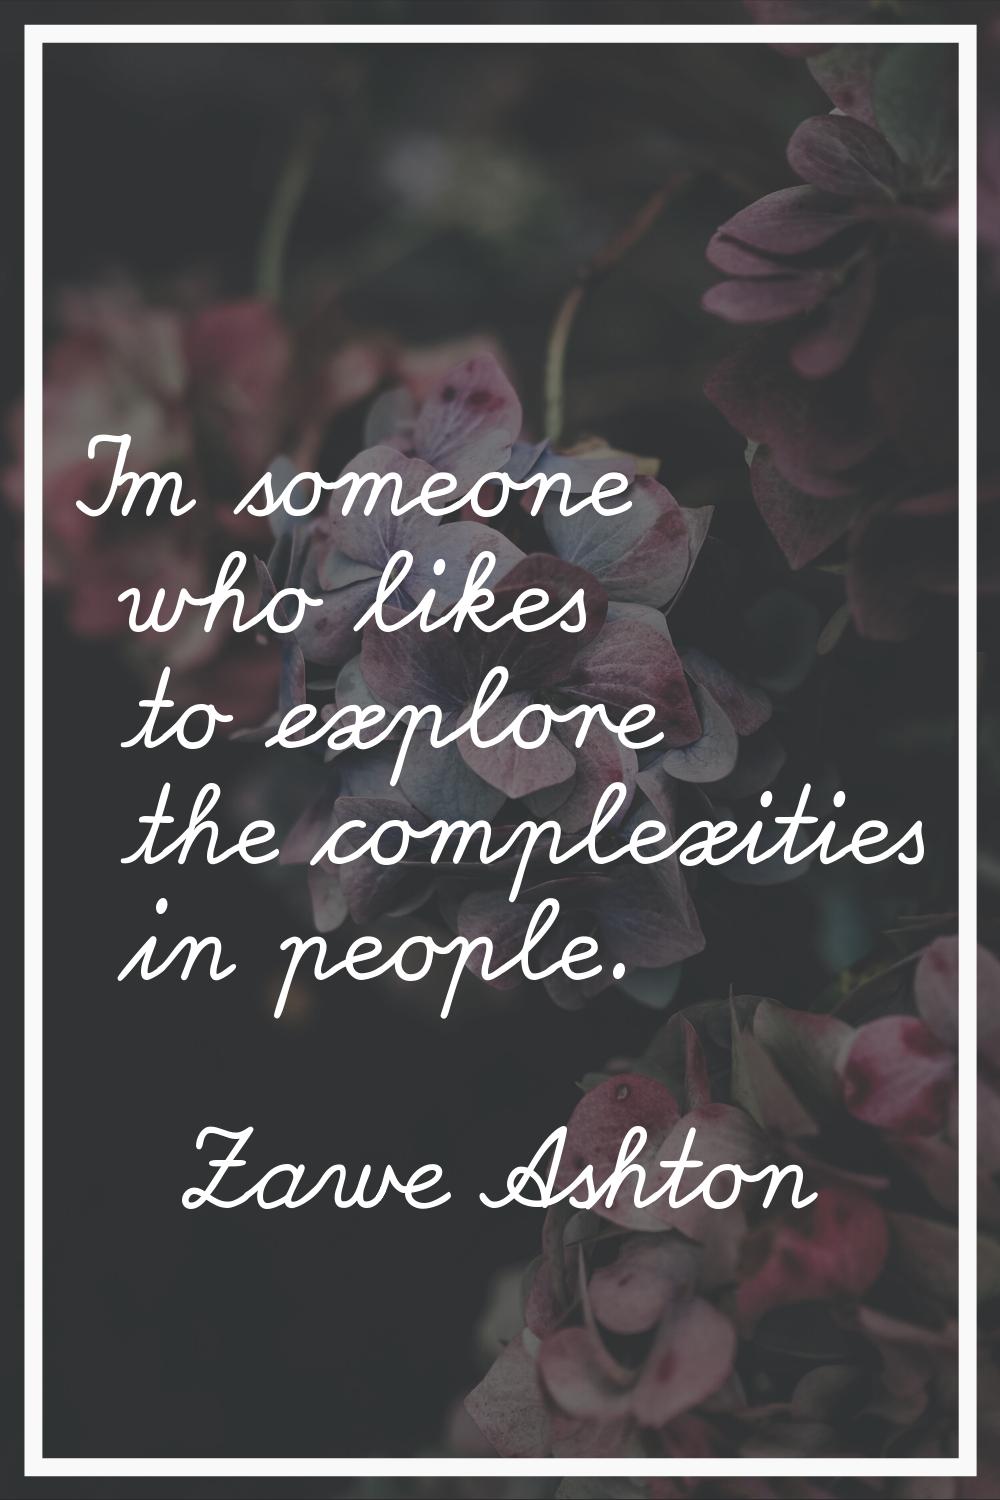 I'm someone who likes to explore the complexities in people.